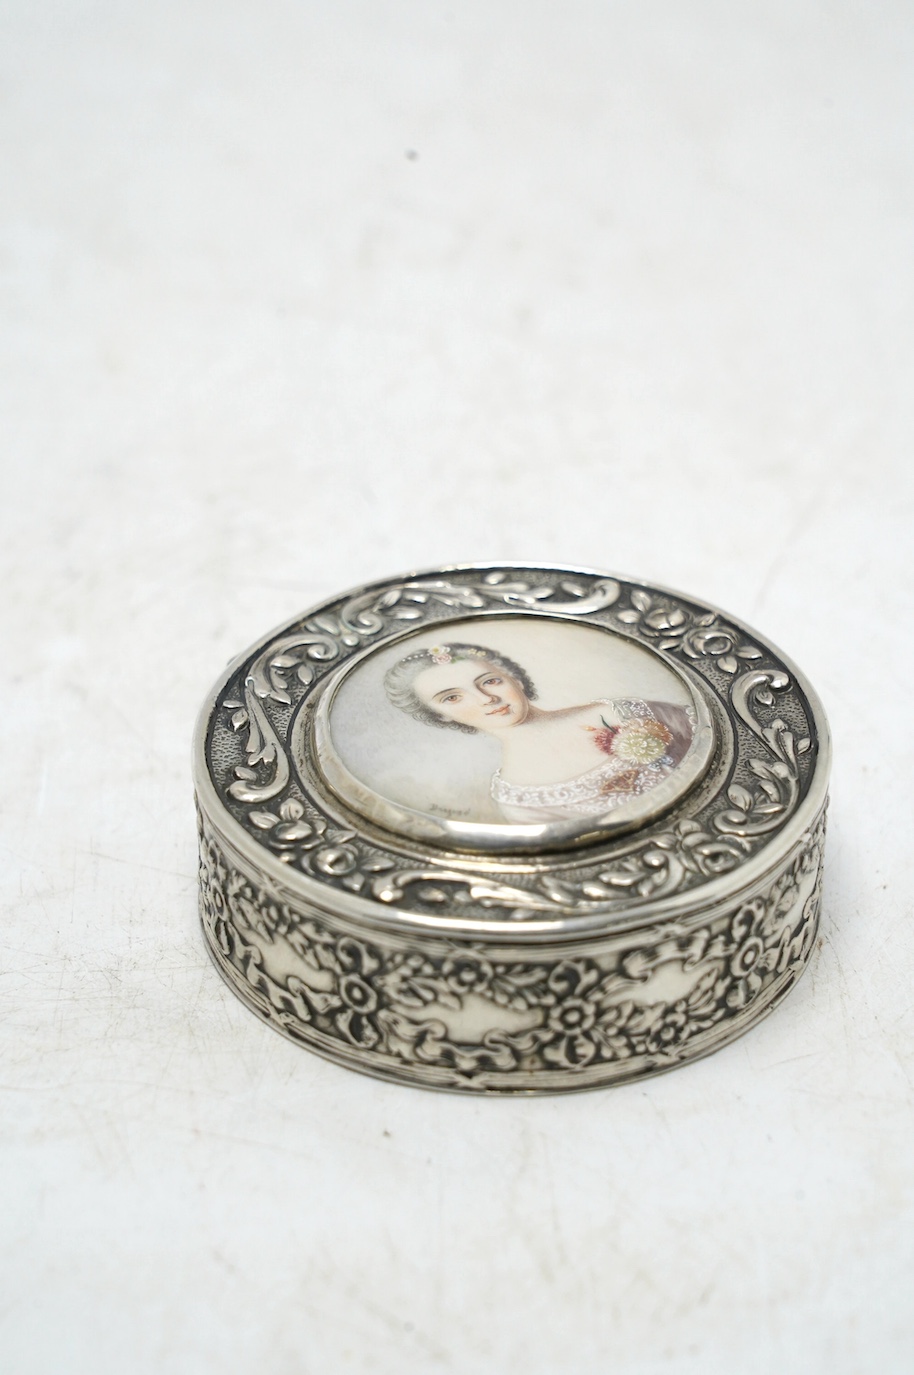 An early 20th century continental white metal circular snuff box, the cover with inset miniature watercolour of a lady signed Drepize?, 58mm. Condition - fair to good